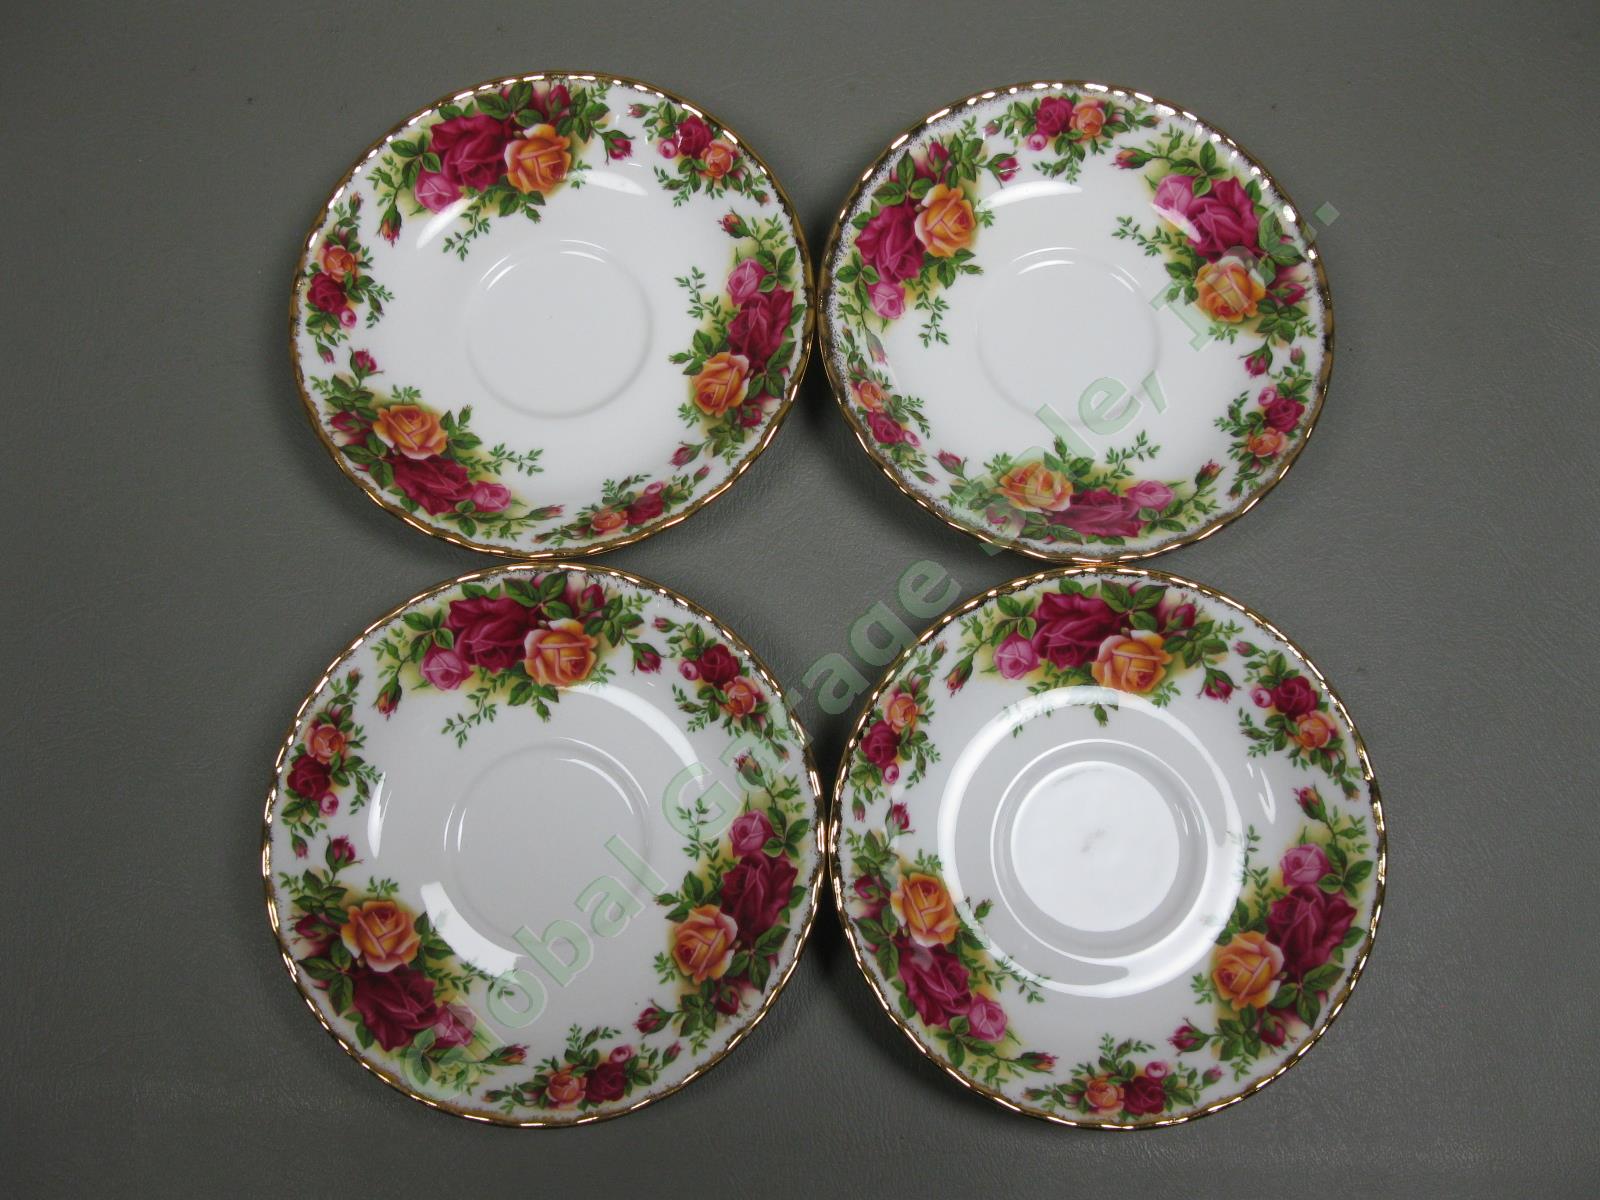 8 Royal Albert Old Country Roses Footed Tea Cup/Saucer Gold Trim Bone China Set 21